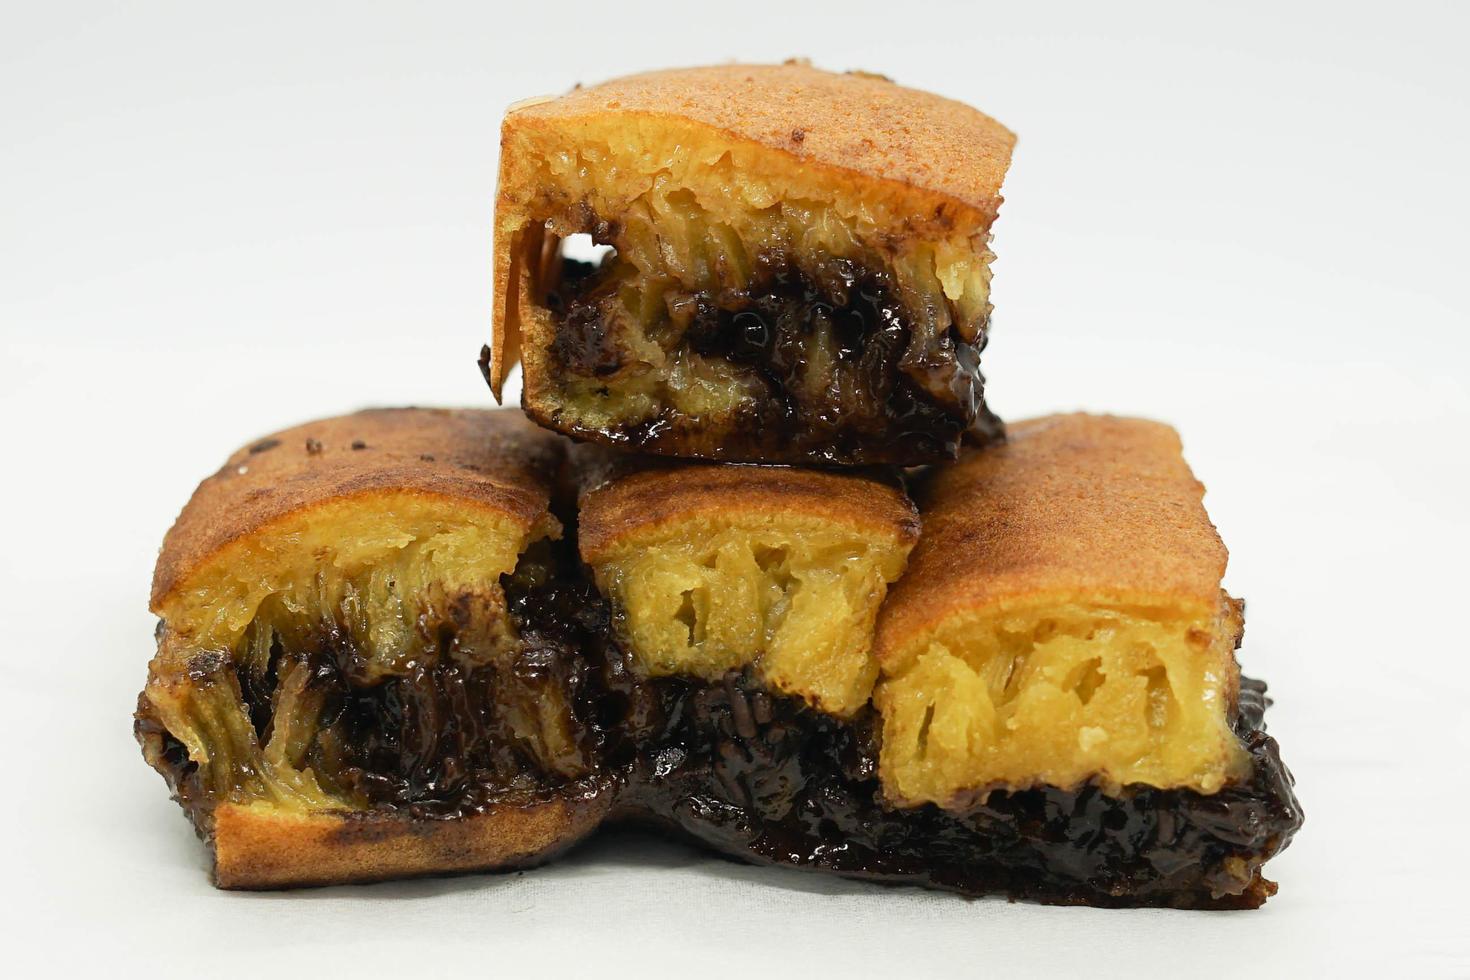 Chocolate Martabak, a specialty food from Indonesia, photo